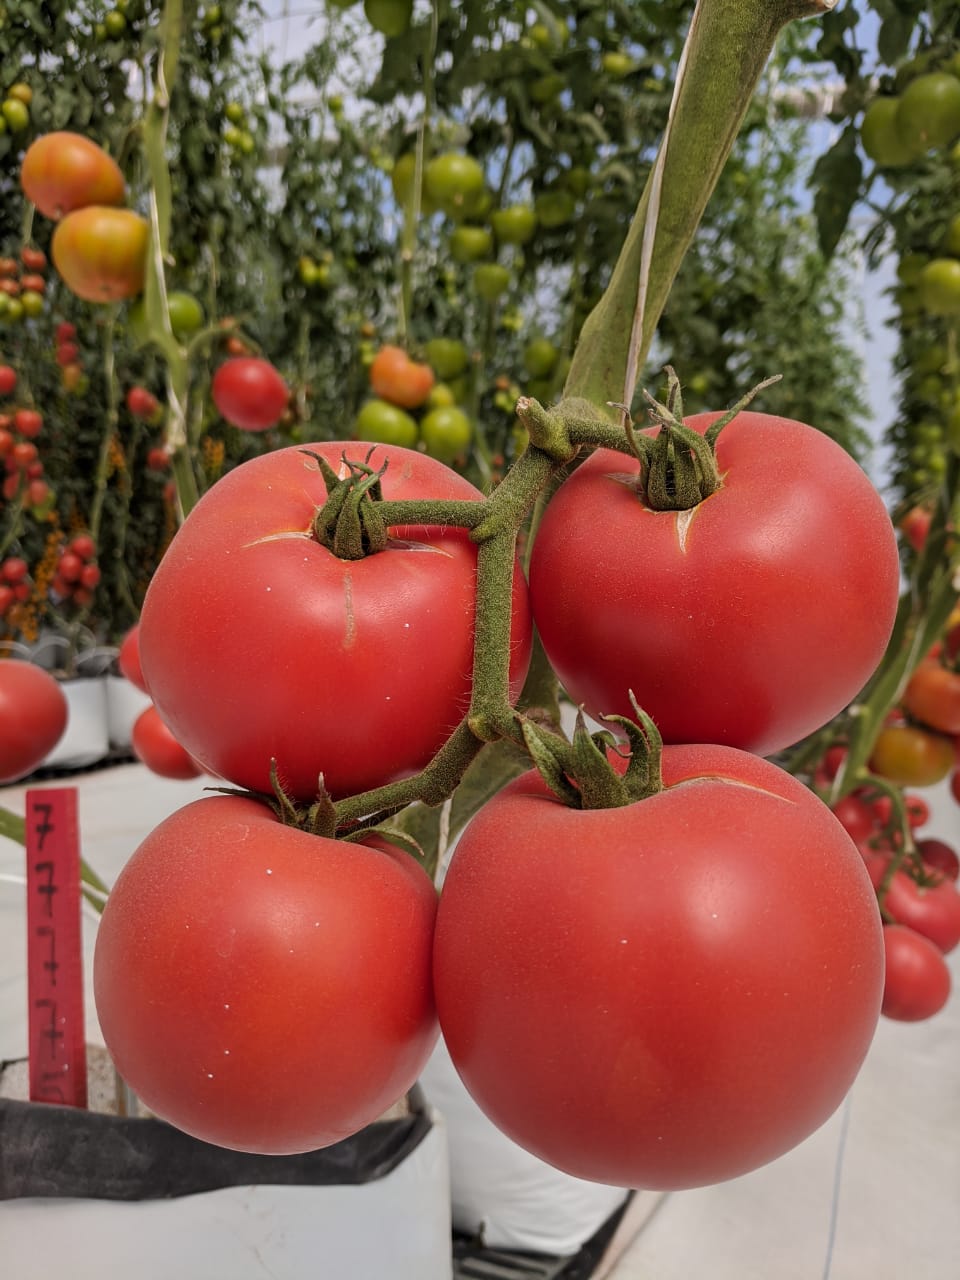 Tomato production, the most requested vegetable by home growers.